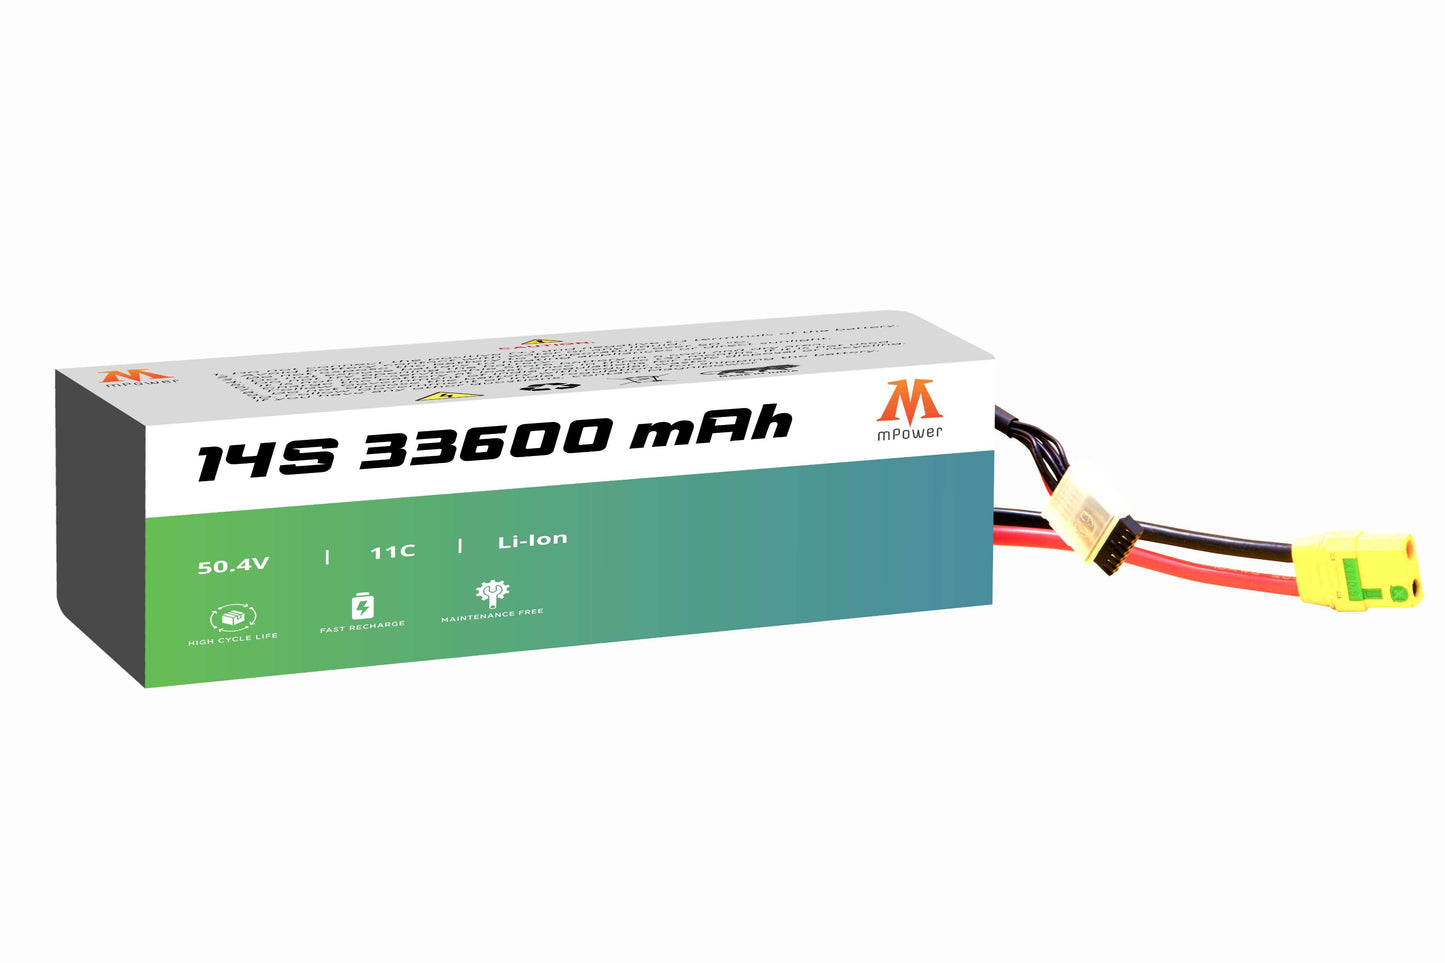 mPower 14S 33600mAh Lithium-Ion Battery for Survey Drones